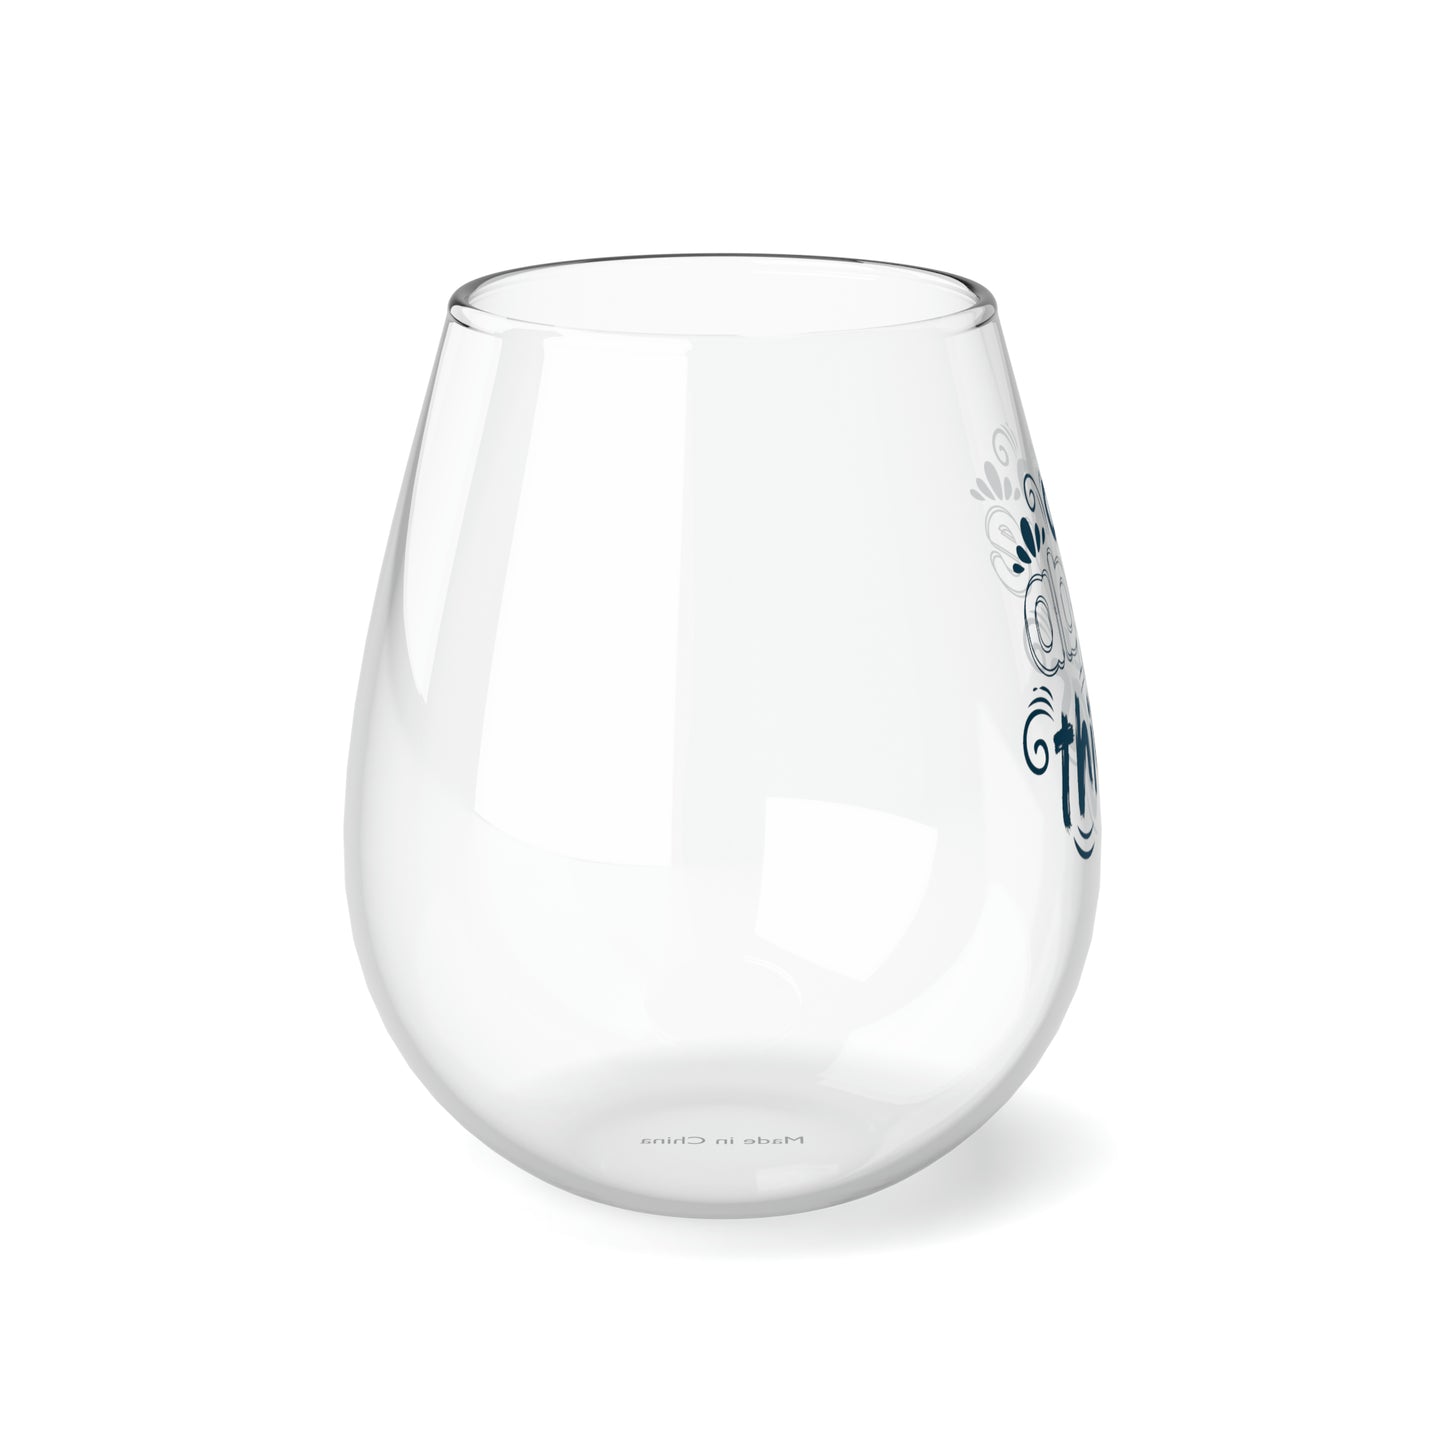 God Above All Things Stemless Wine Glass, 11.75oz